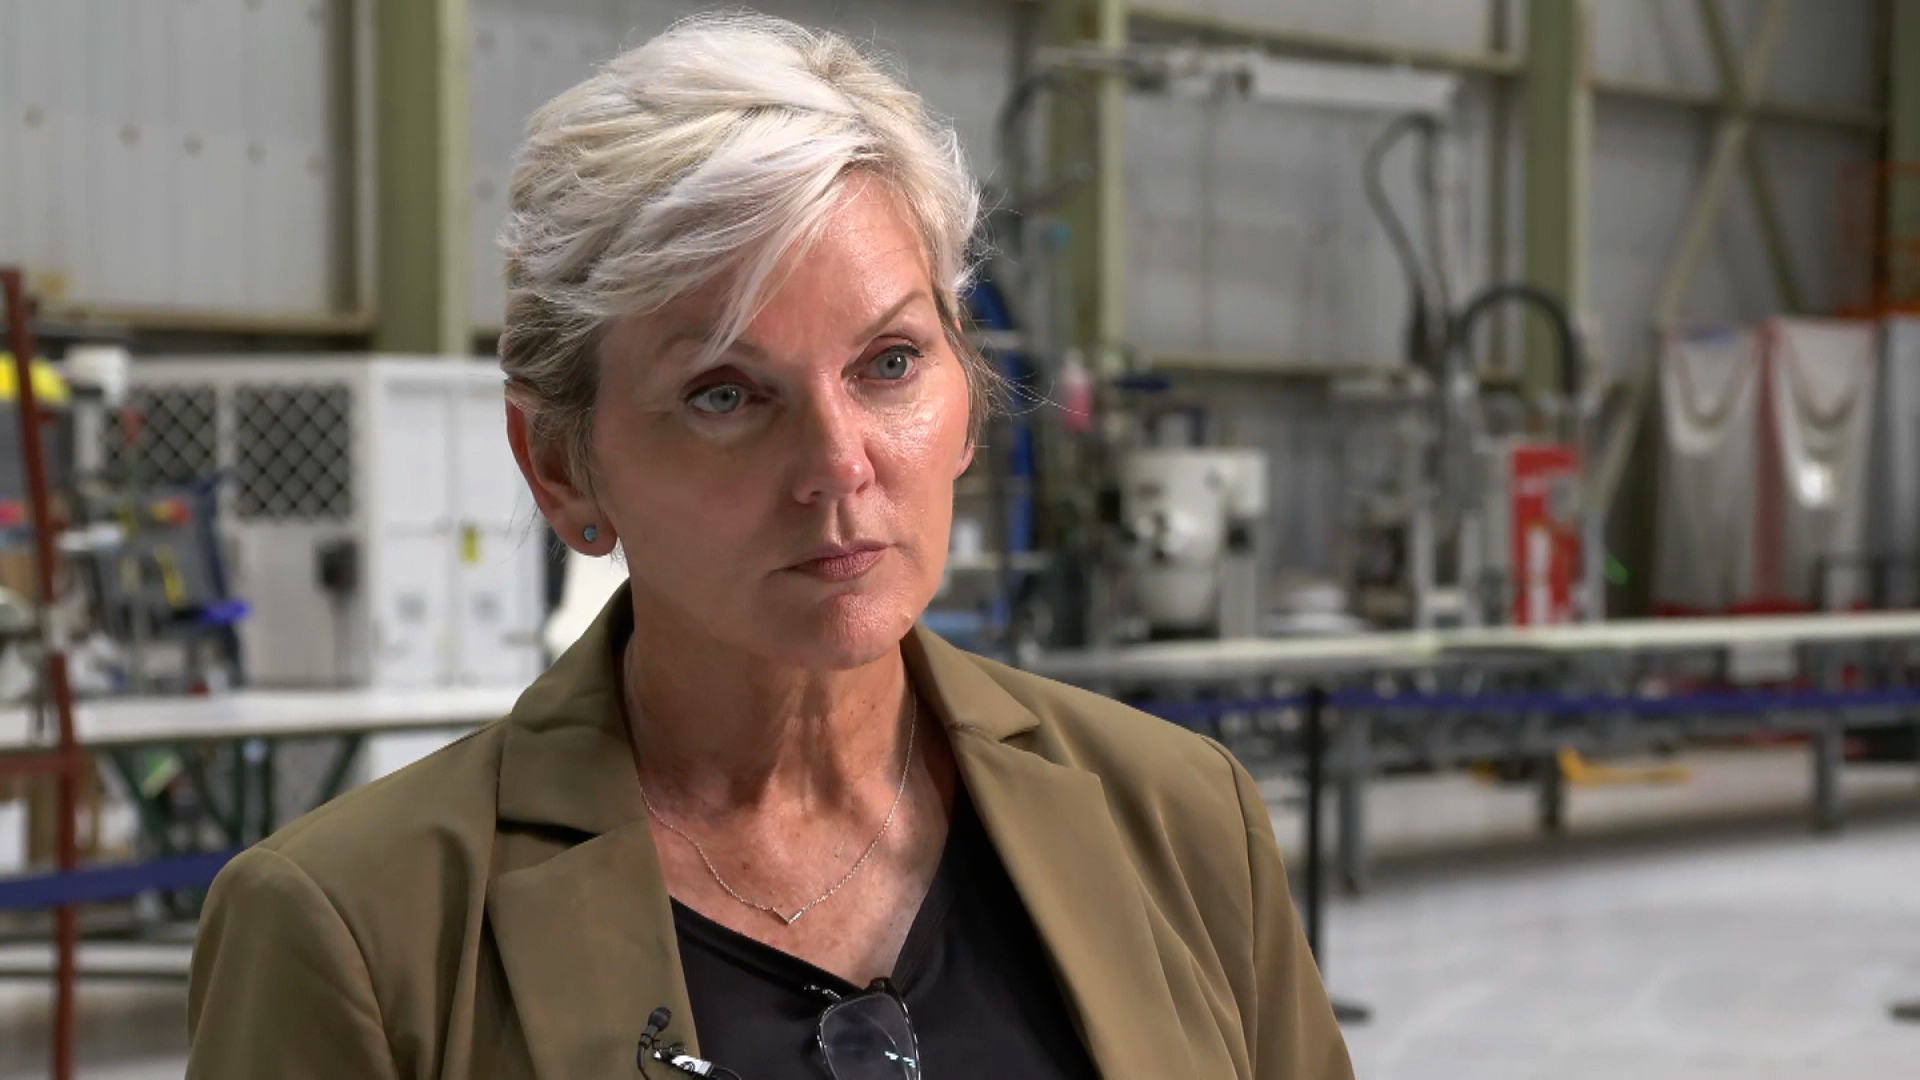 Energy Secretary Jennifer Granholm during a CNN interview at a General Electric wind turbine facility in New Orleans on May 24.